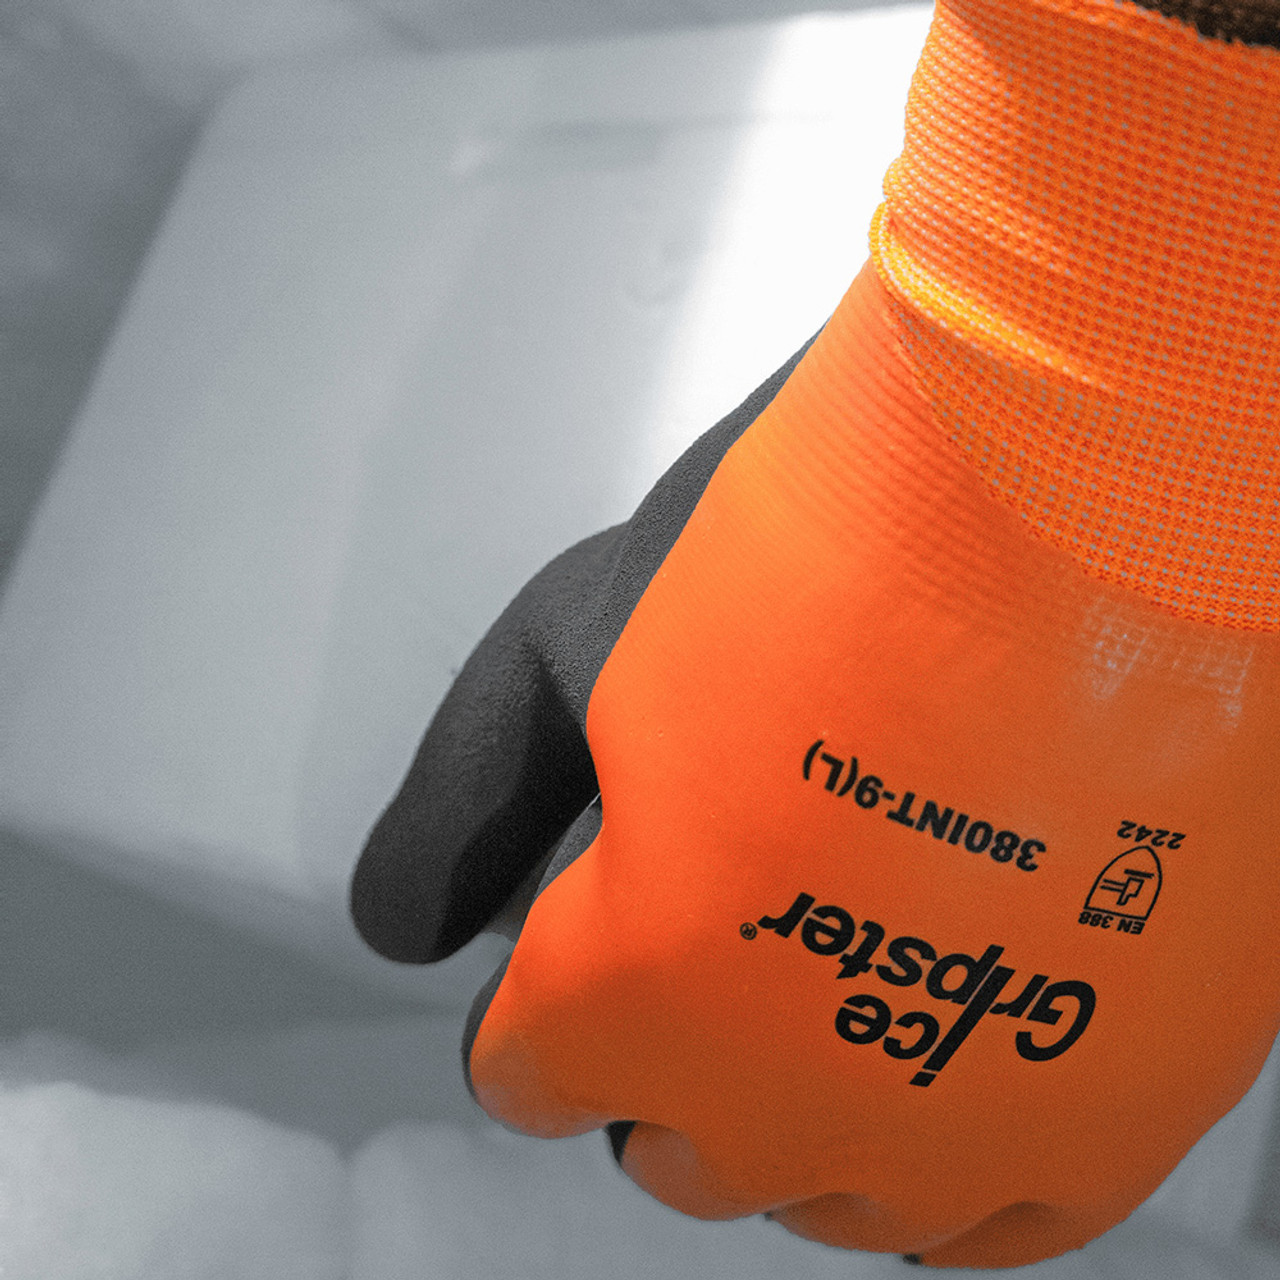 Ice Gripster - Rubber Dipped Low Temperature Gloves